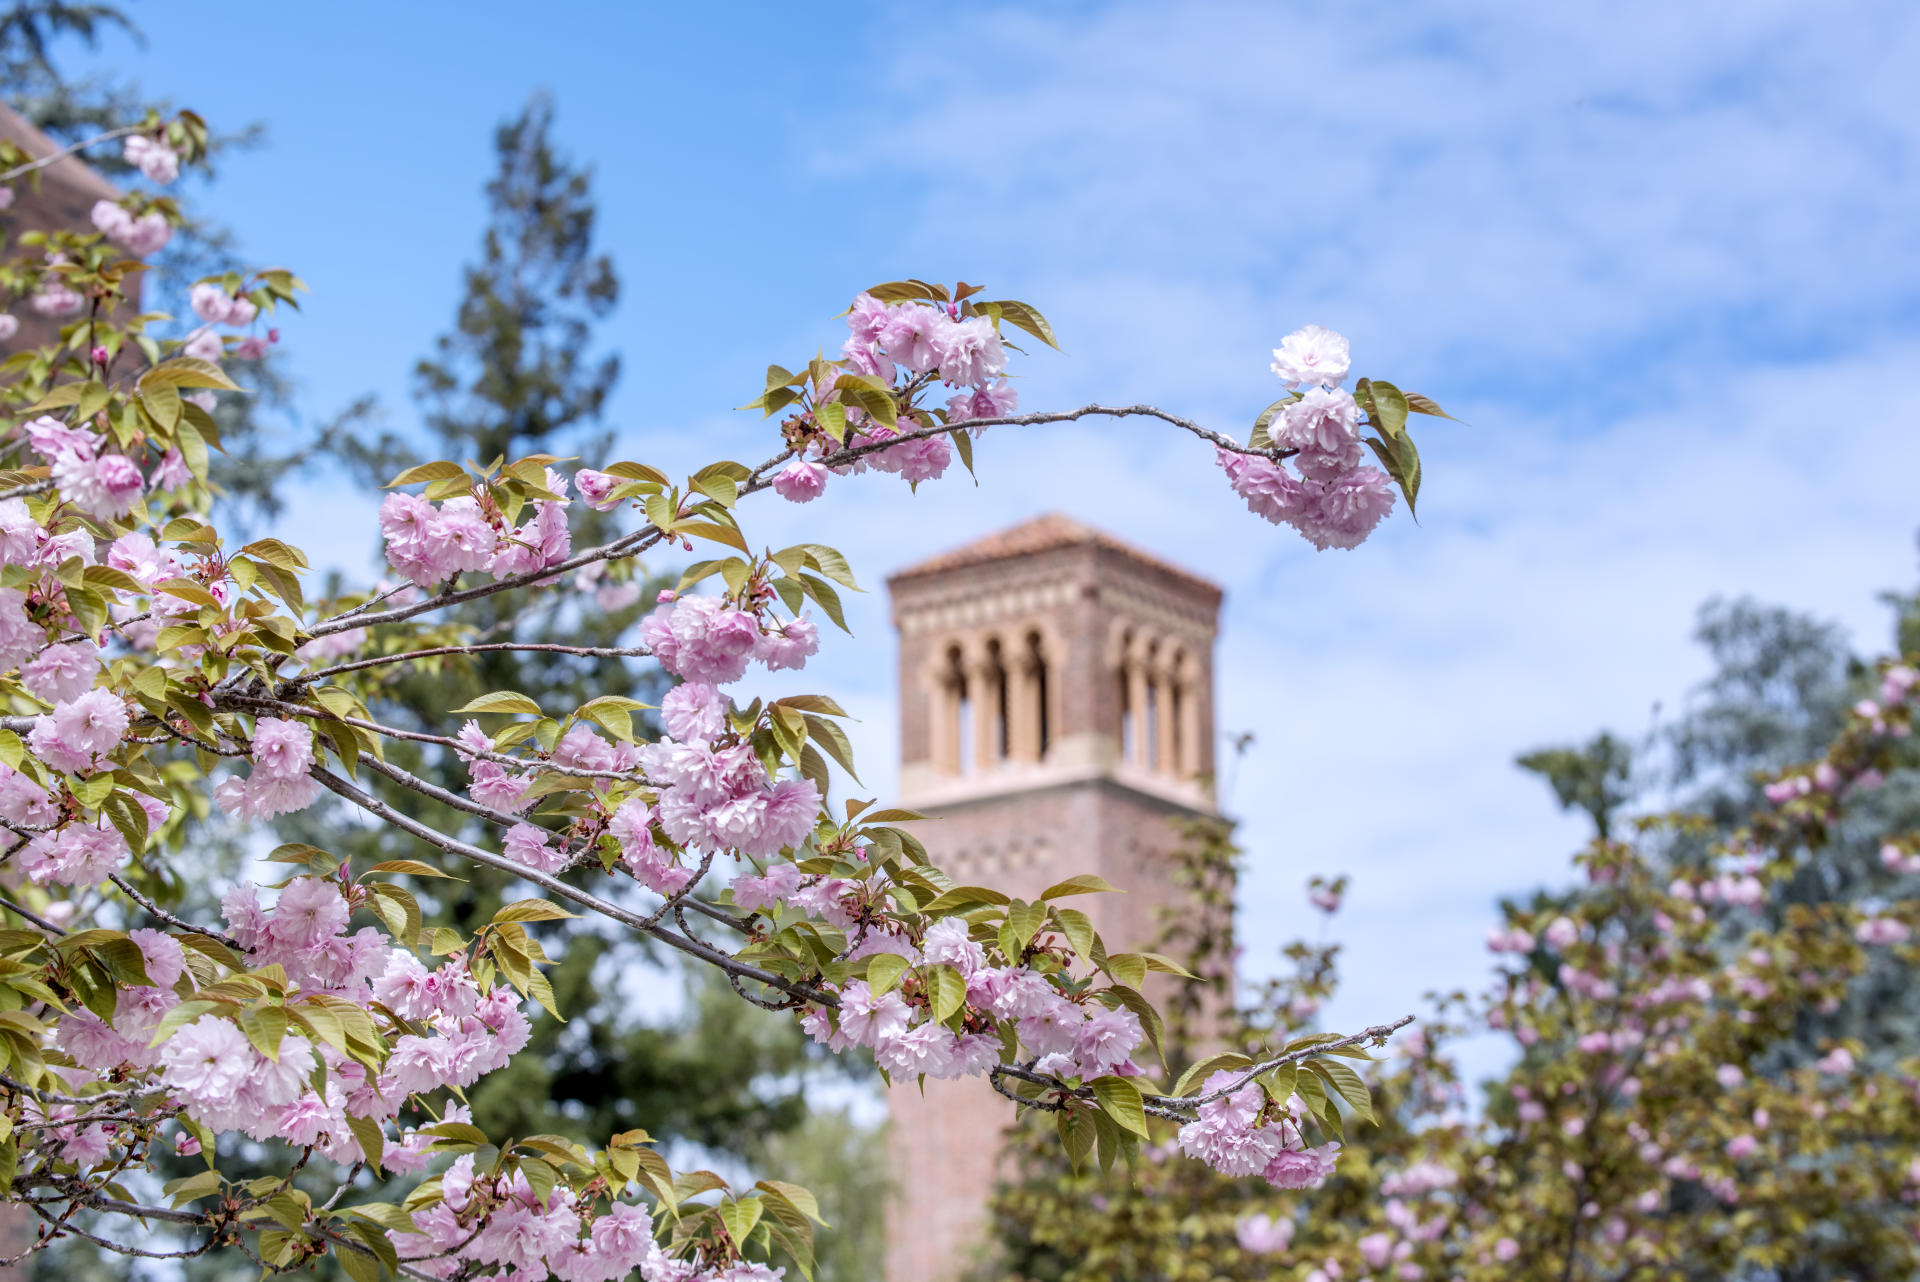 Trinity Hall's bell tower is visible through a cluster of spring blossoms.